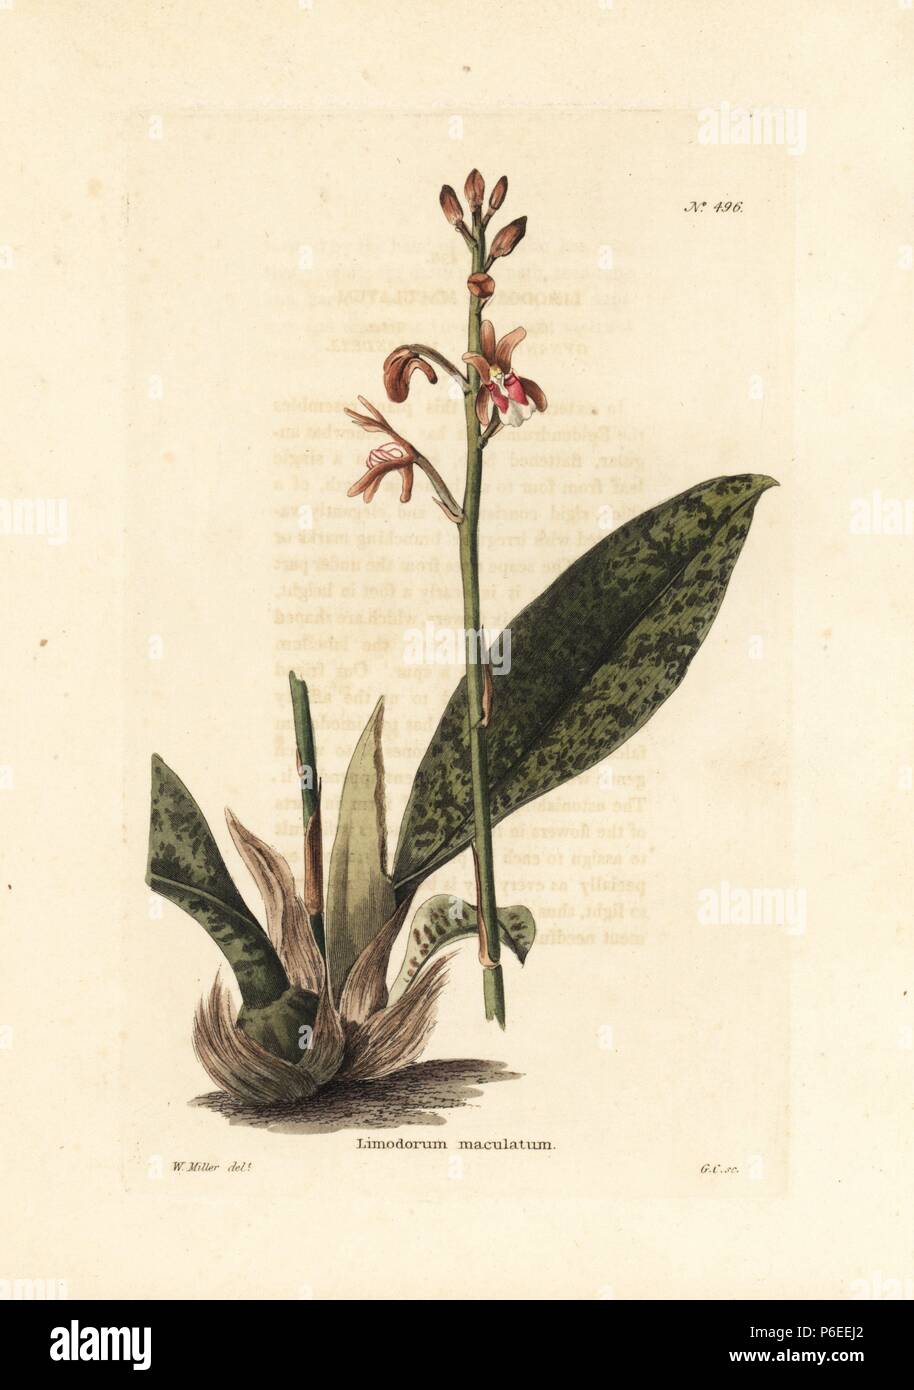 Monk orchid or African spotted orchid, Oeceoclades maculata. Handcoloured copperplate engraving by George Cooke after an illustration by W. Miller from Conrad Loddiges' Botanical Cabinet, London, 1810. Stock Photo